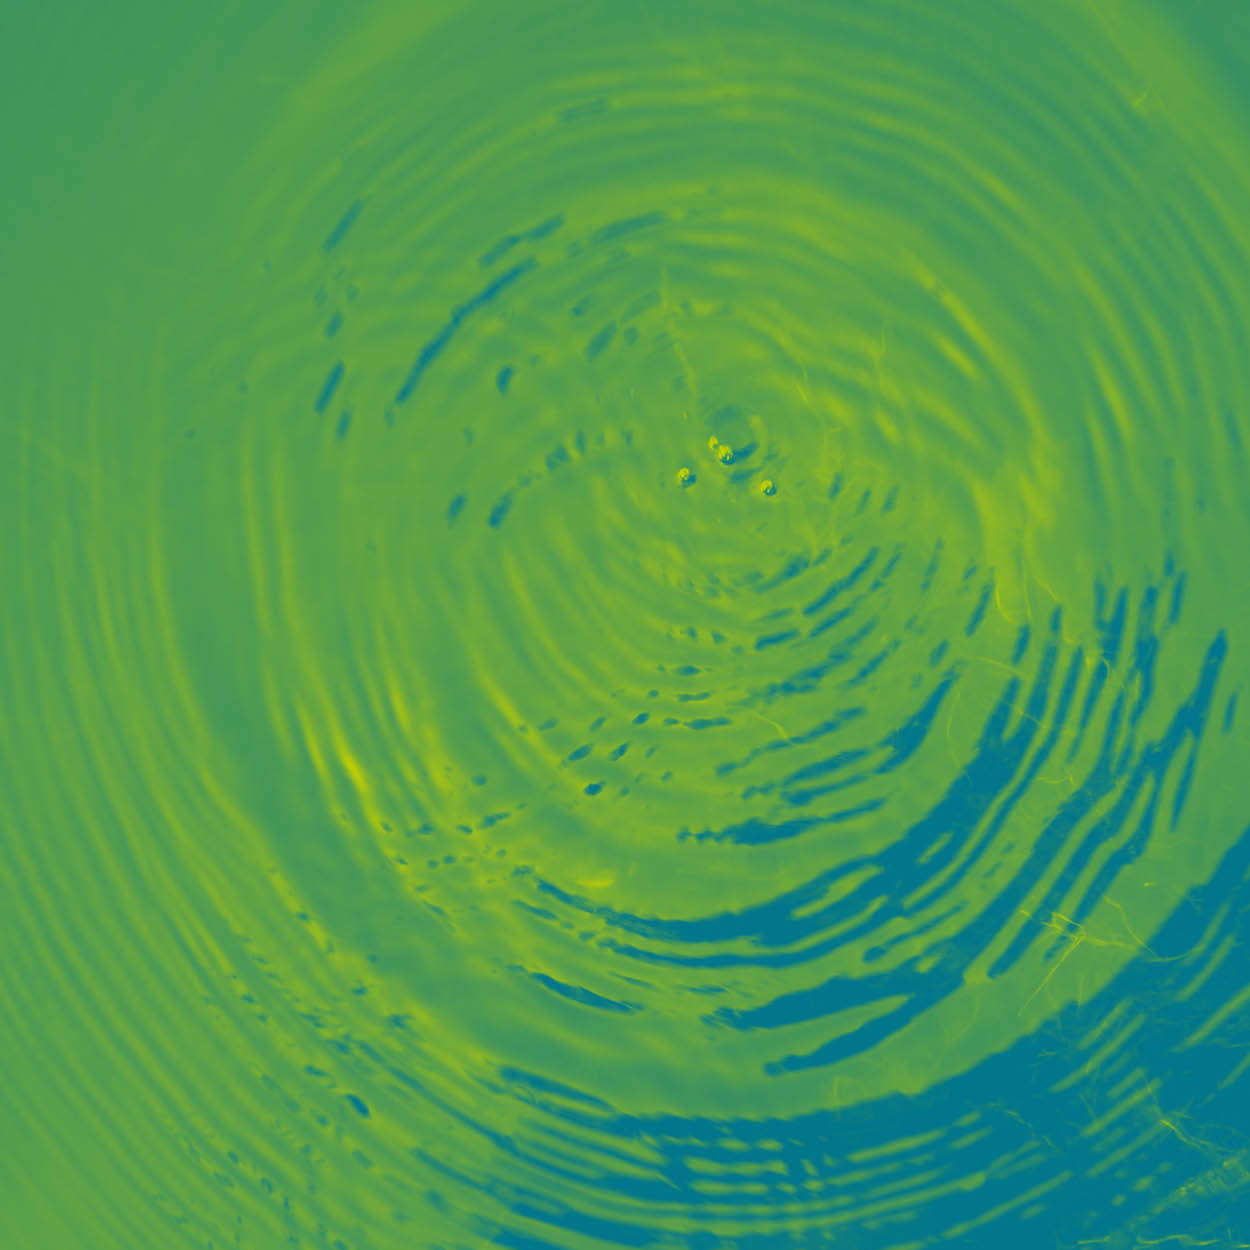 Abstract swirling green and blue image